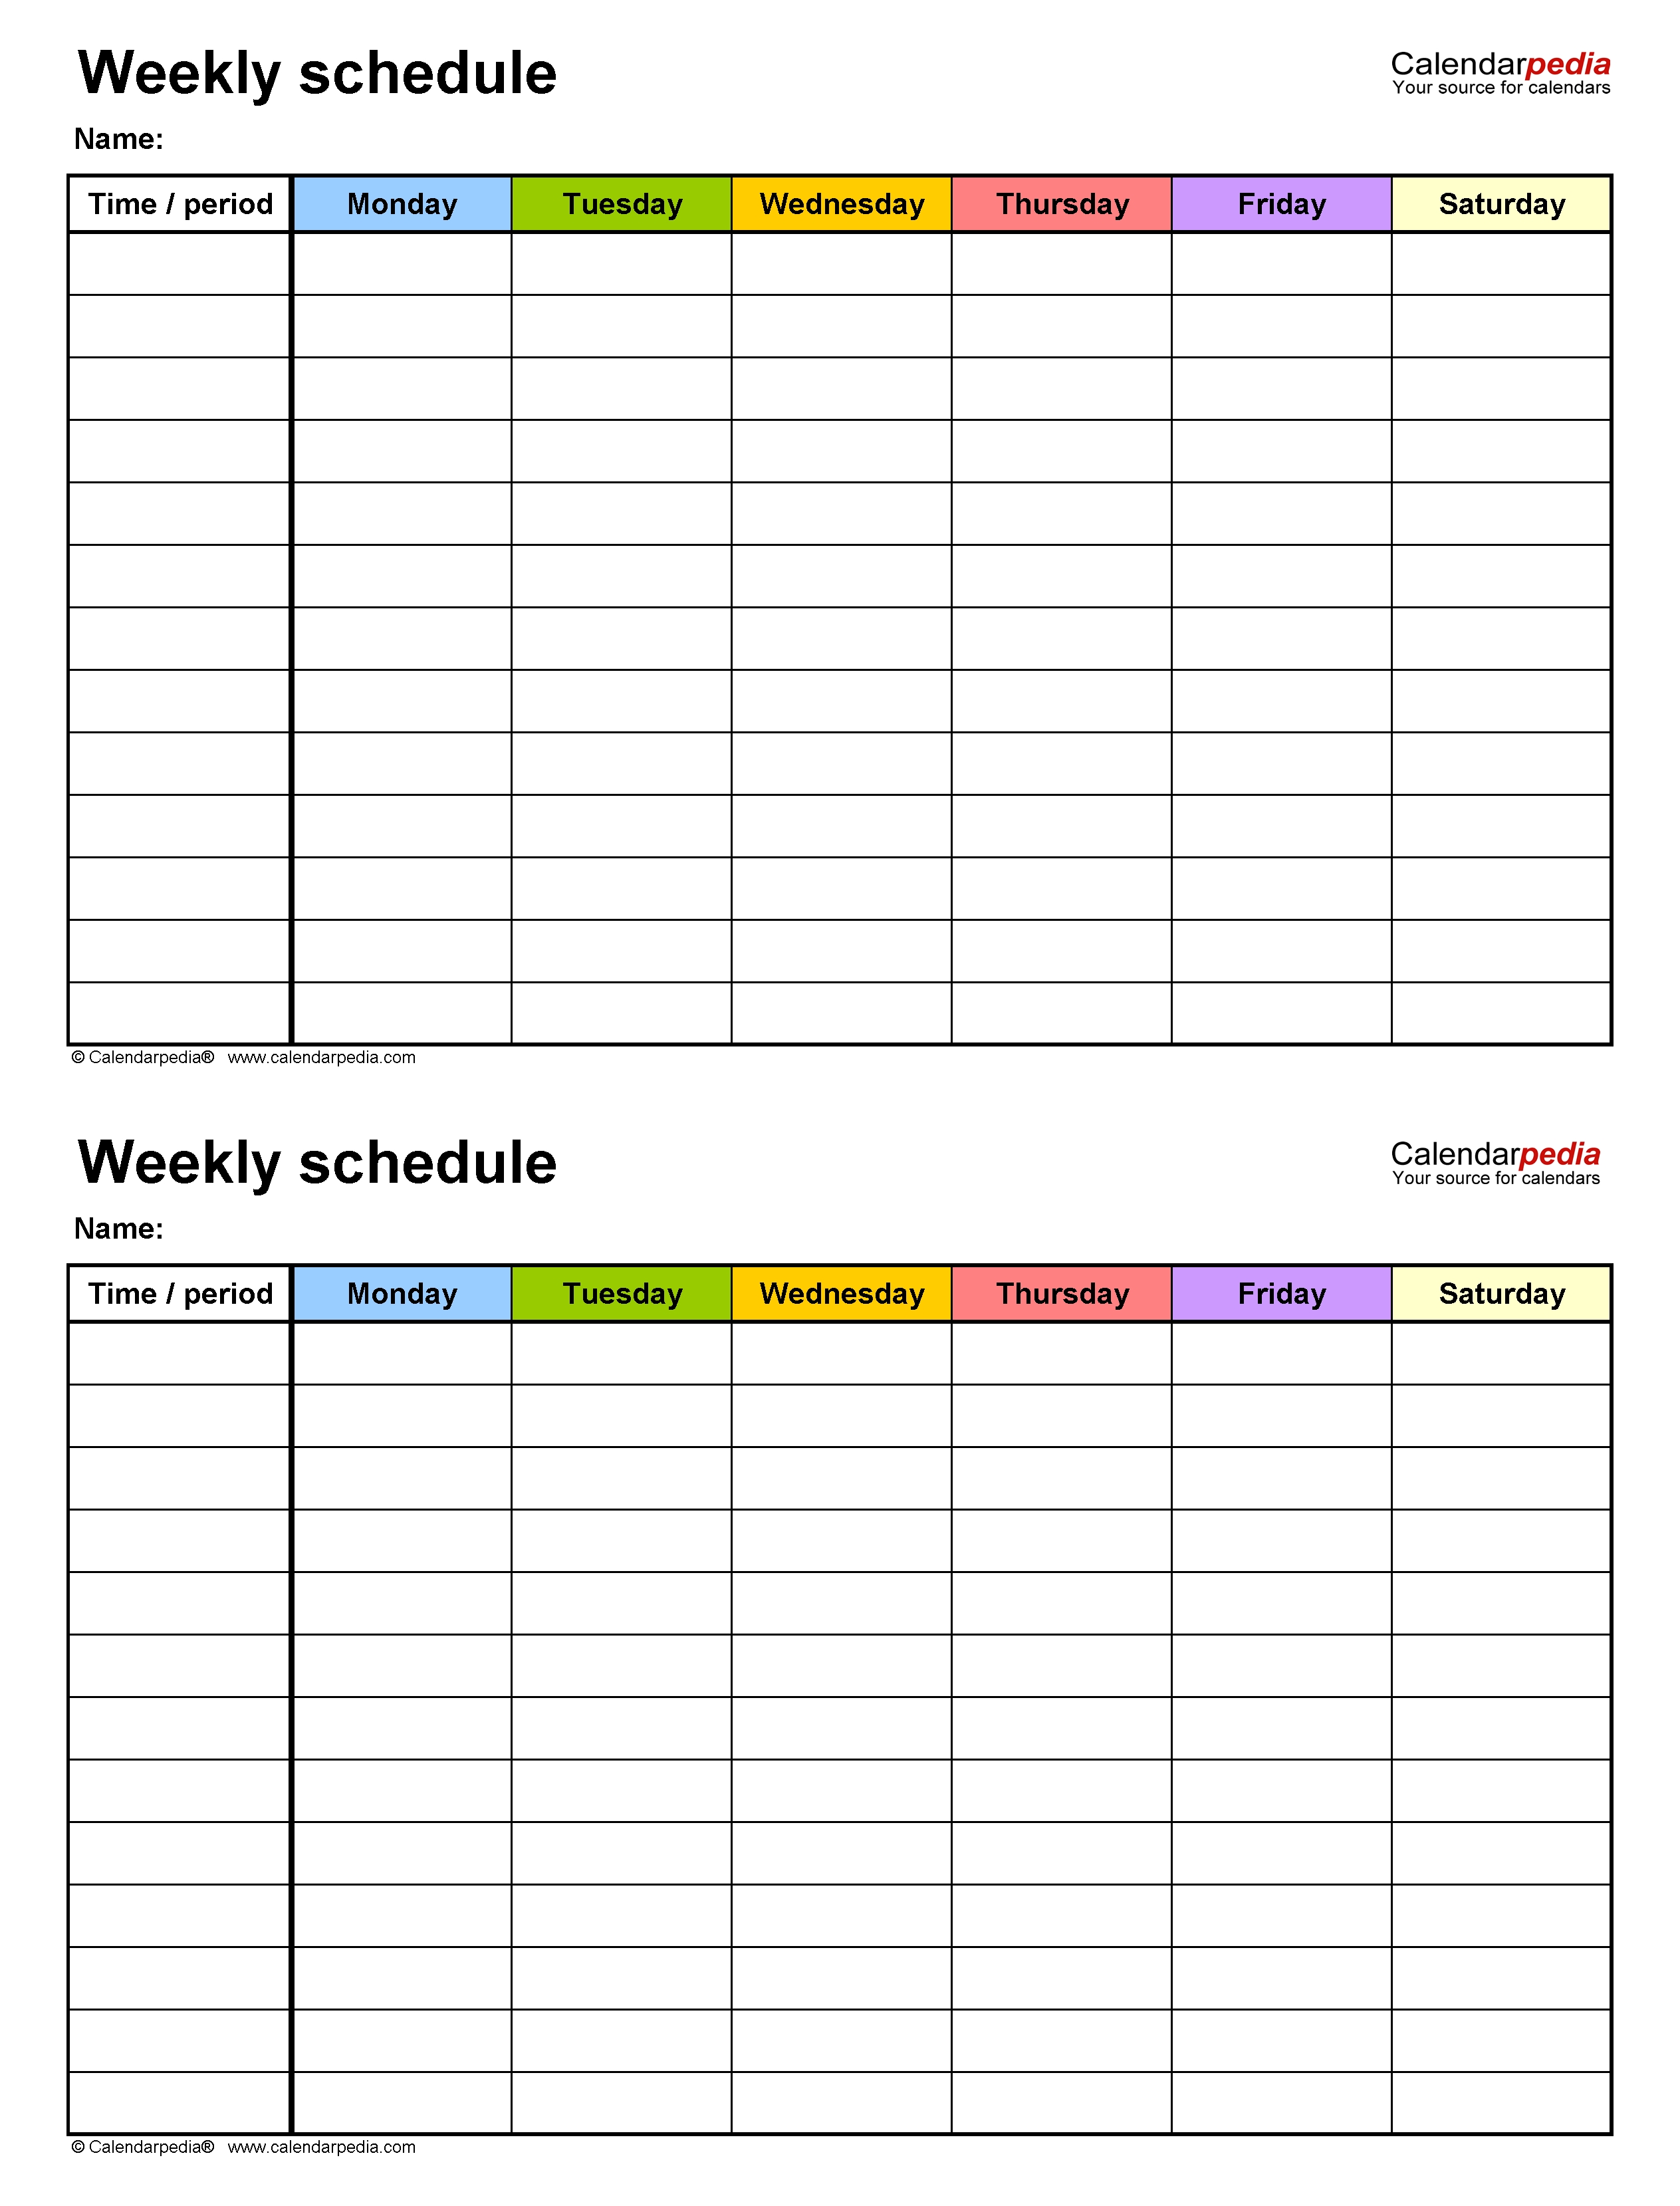 Free Weekly Schedule Templates For Word - 18 Templates 2 Week Calendar Template Free